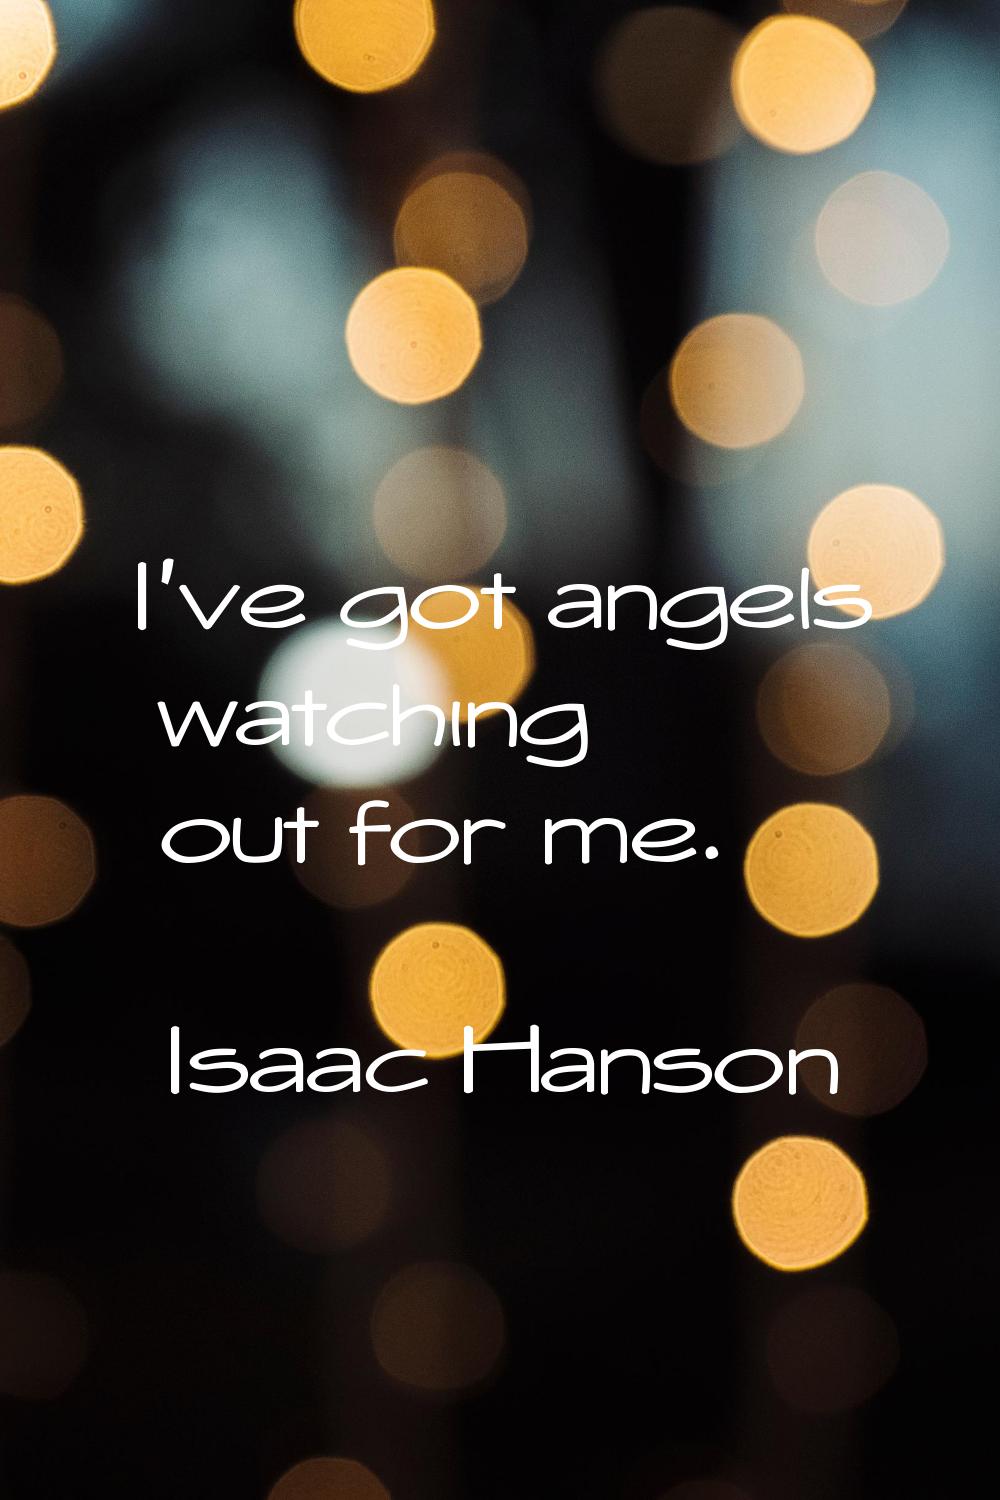 I've got angels watching out for me.